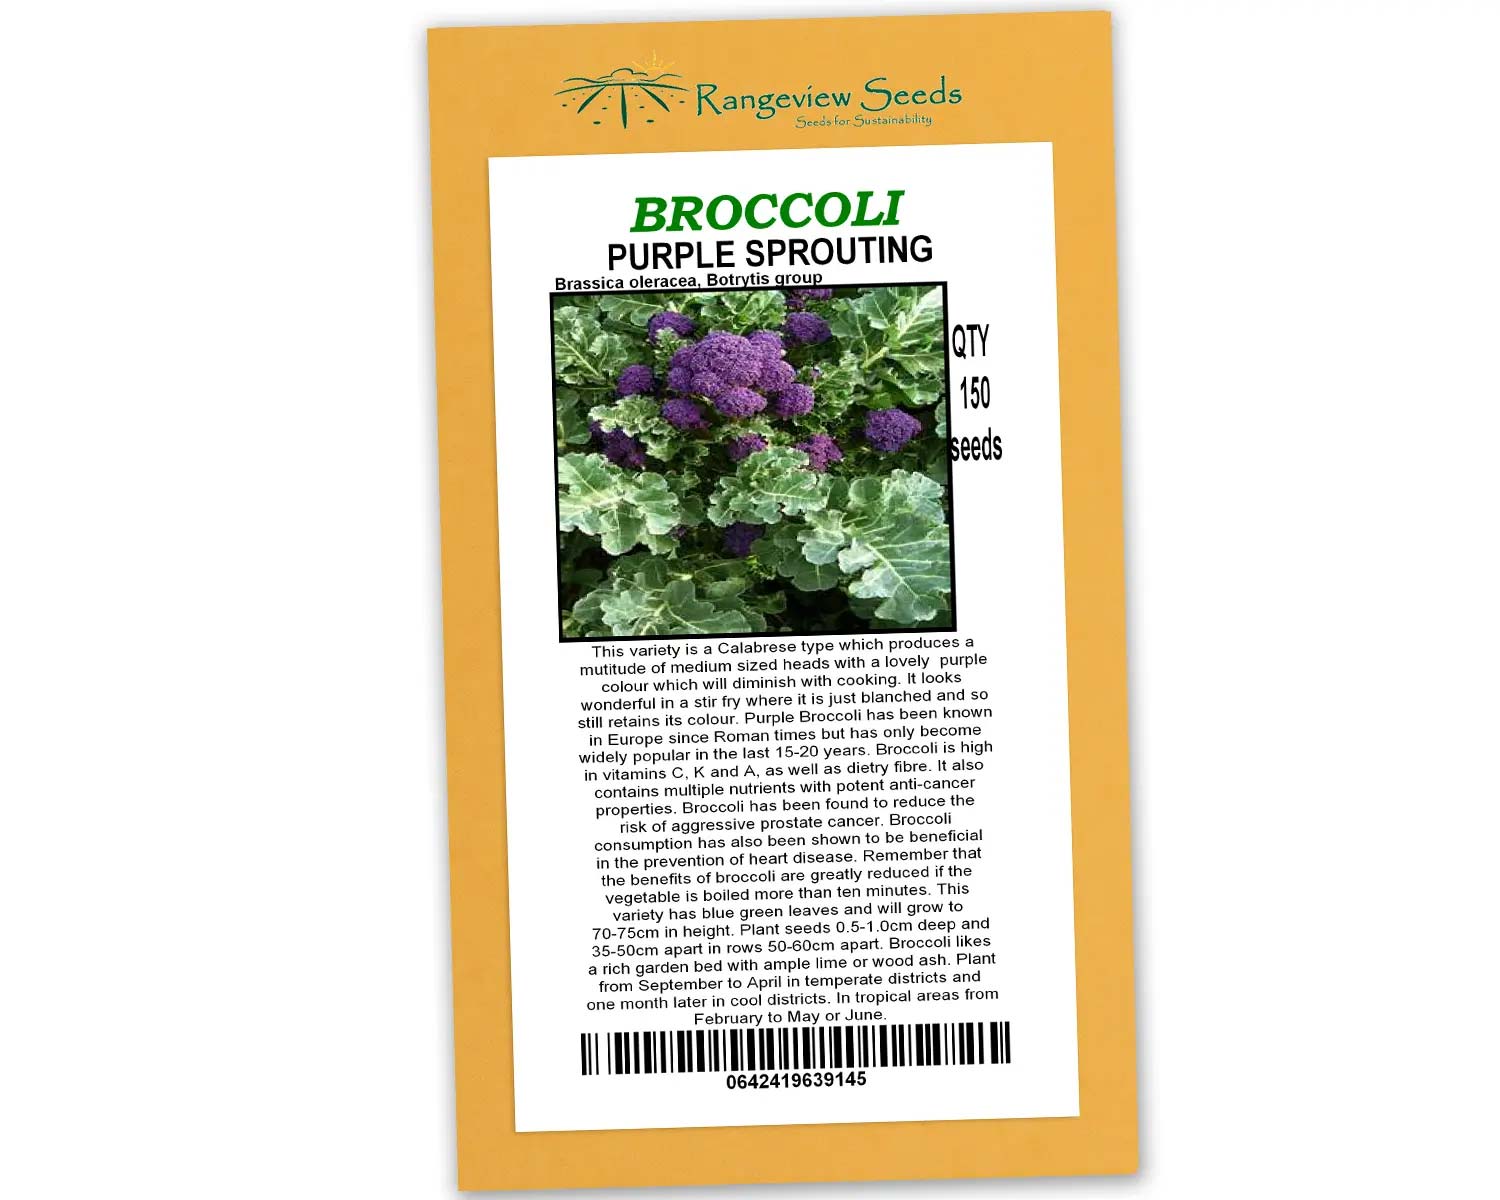 Broccoli Purple Sprouting - Rangeview Seeds